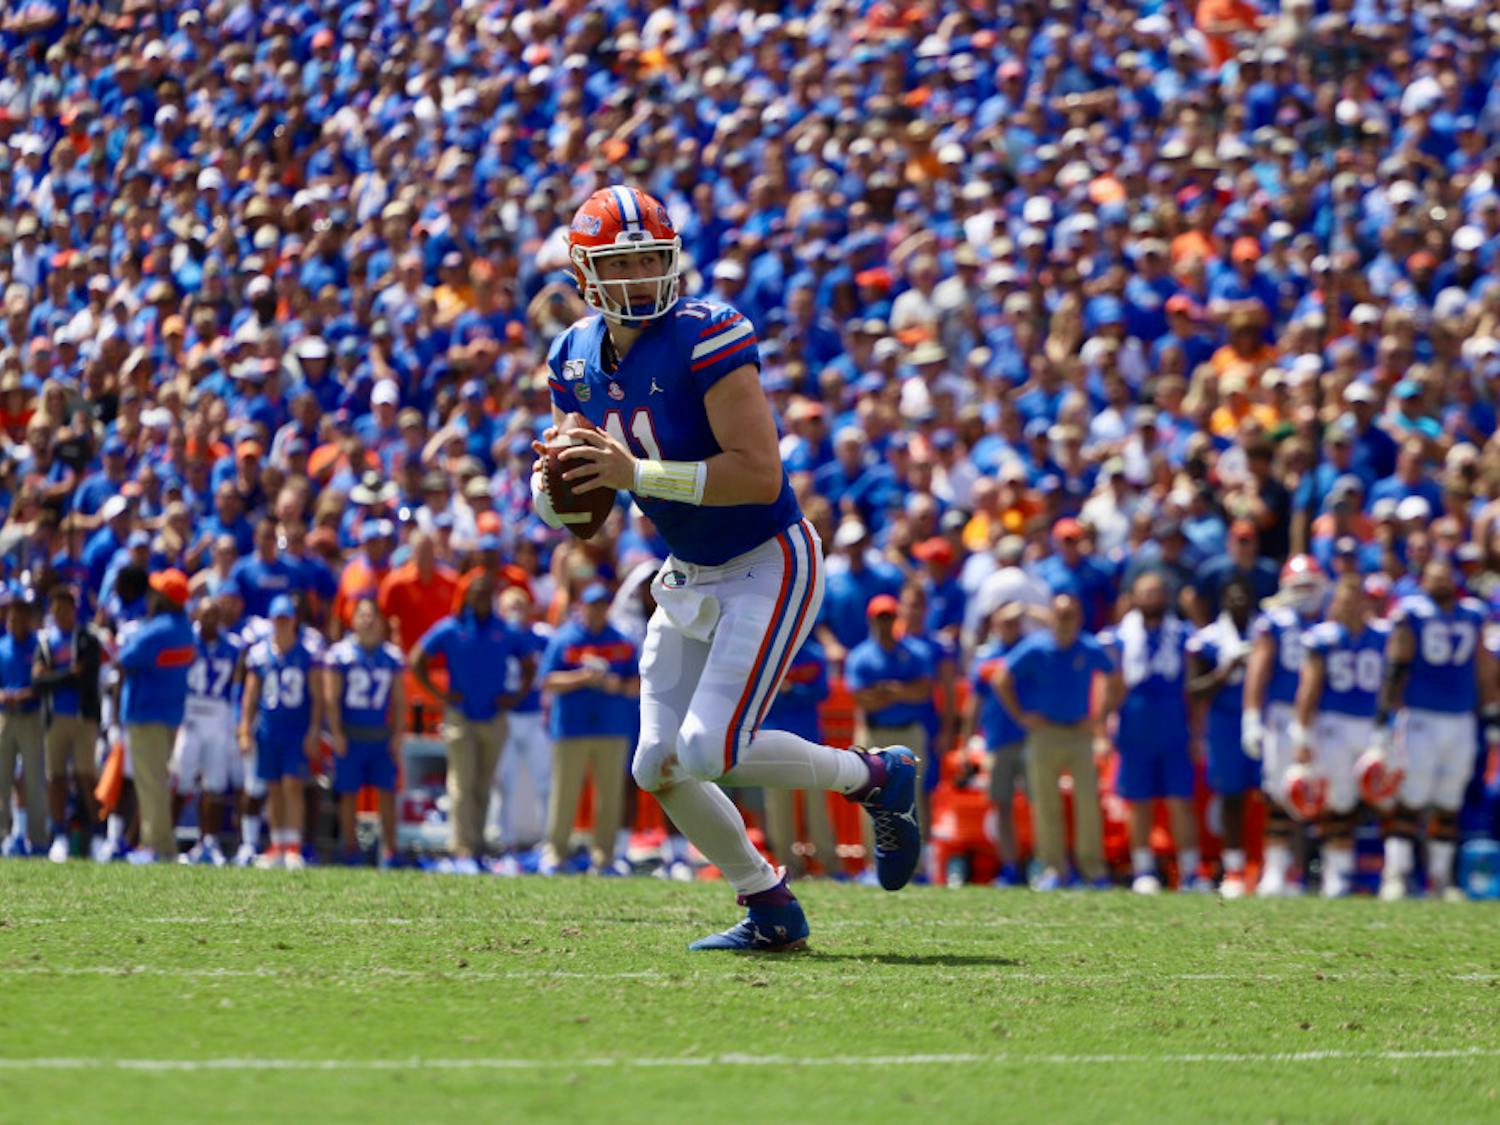 Quarterback Kyle Trask drops back in front of a packed crowd against Tennessee last season. This year, most SEC schools will cap their stadium capacities at about 20 to 25 percent.